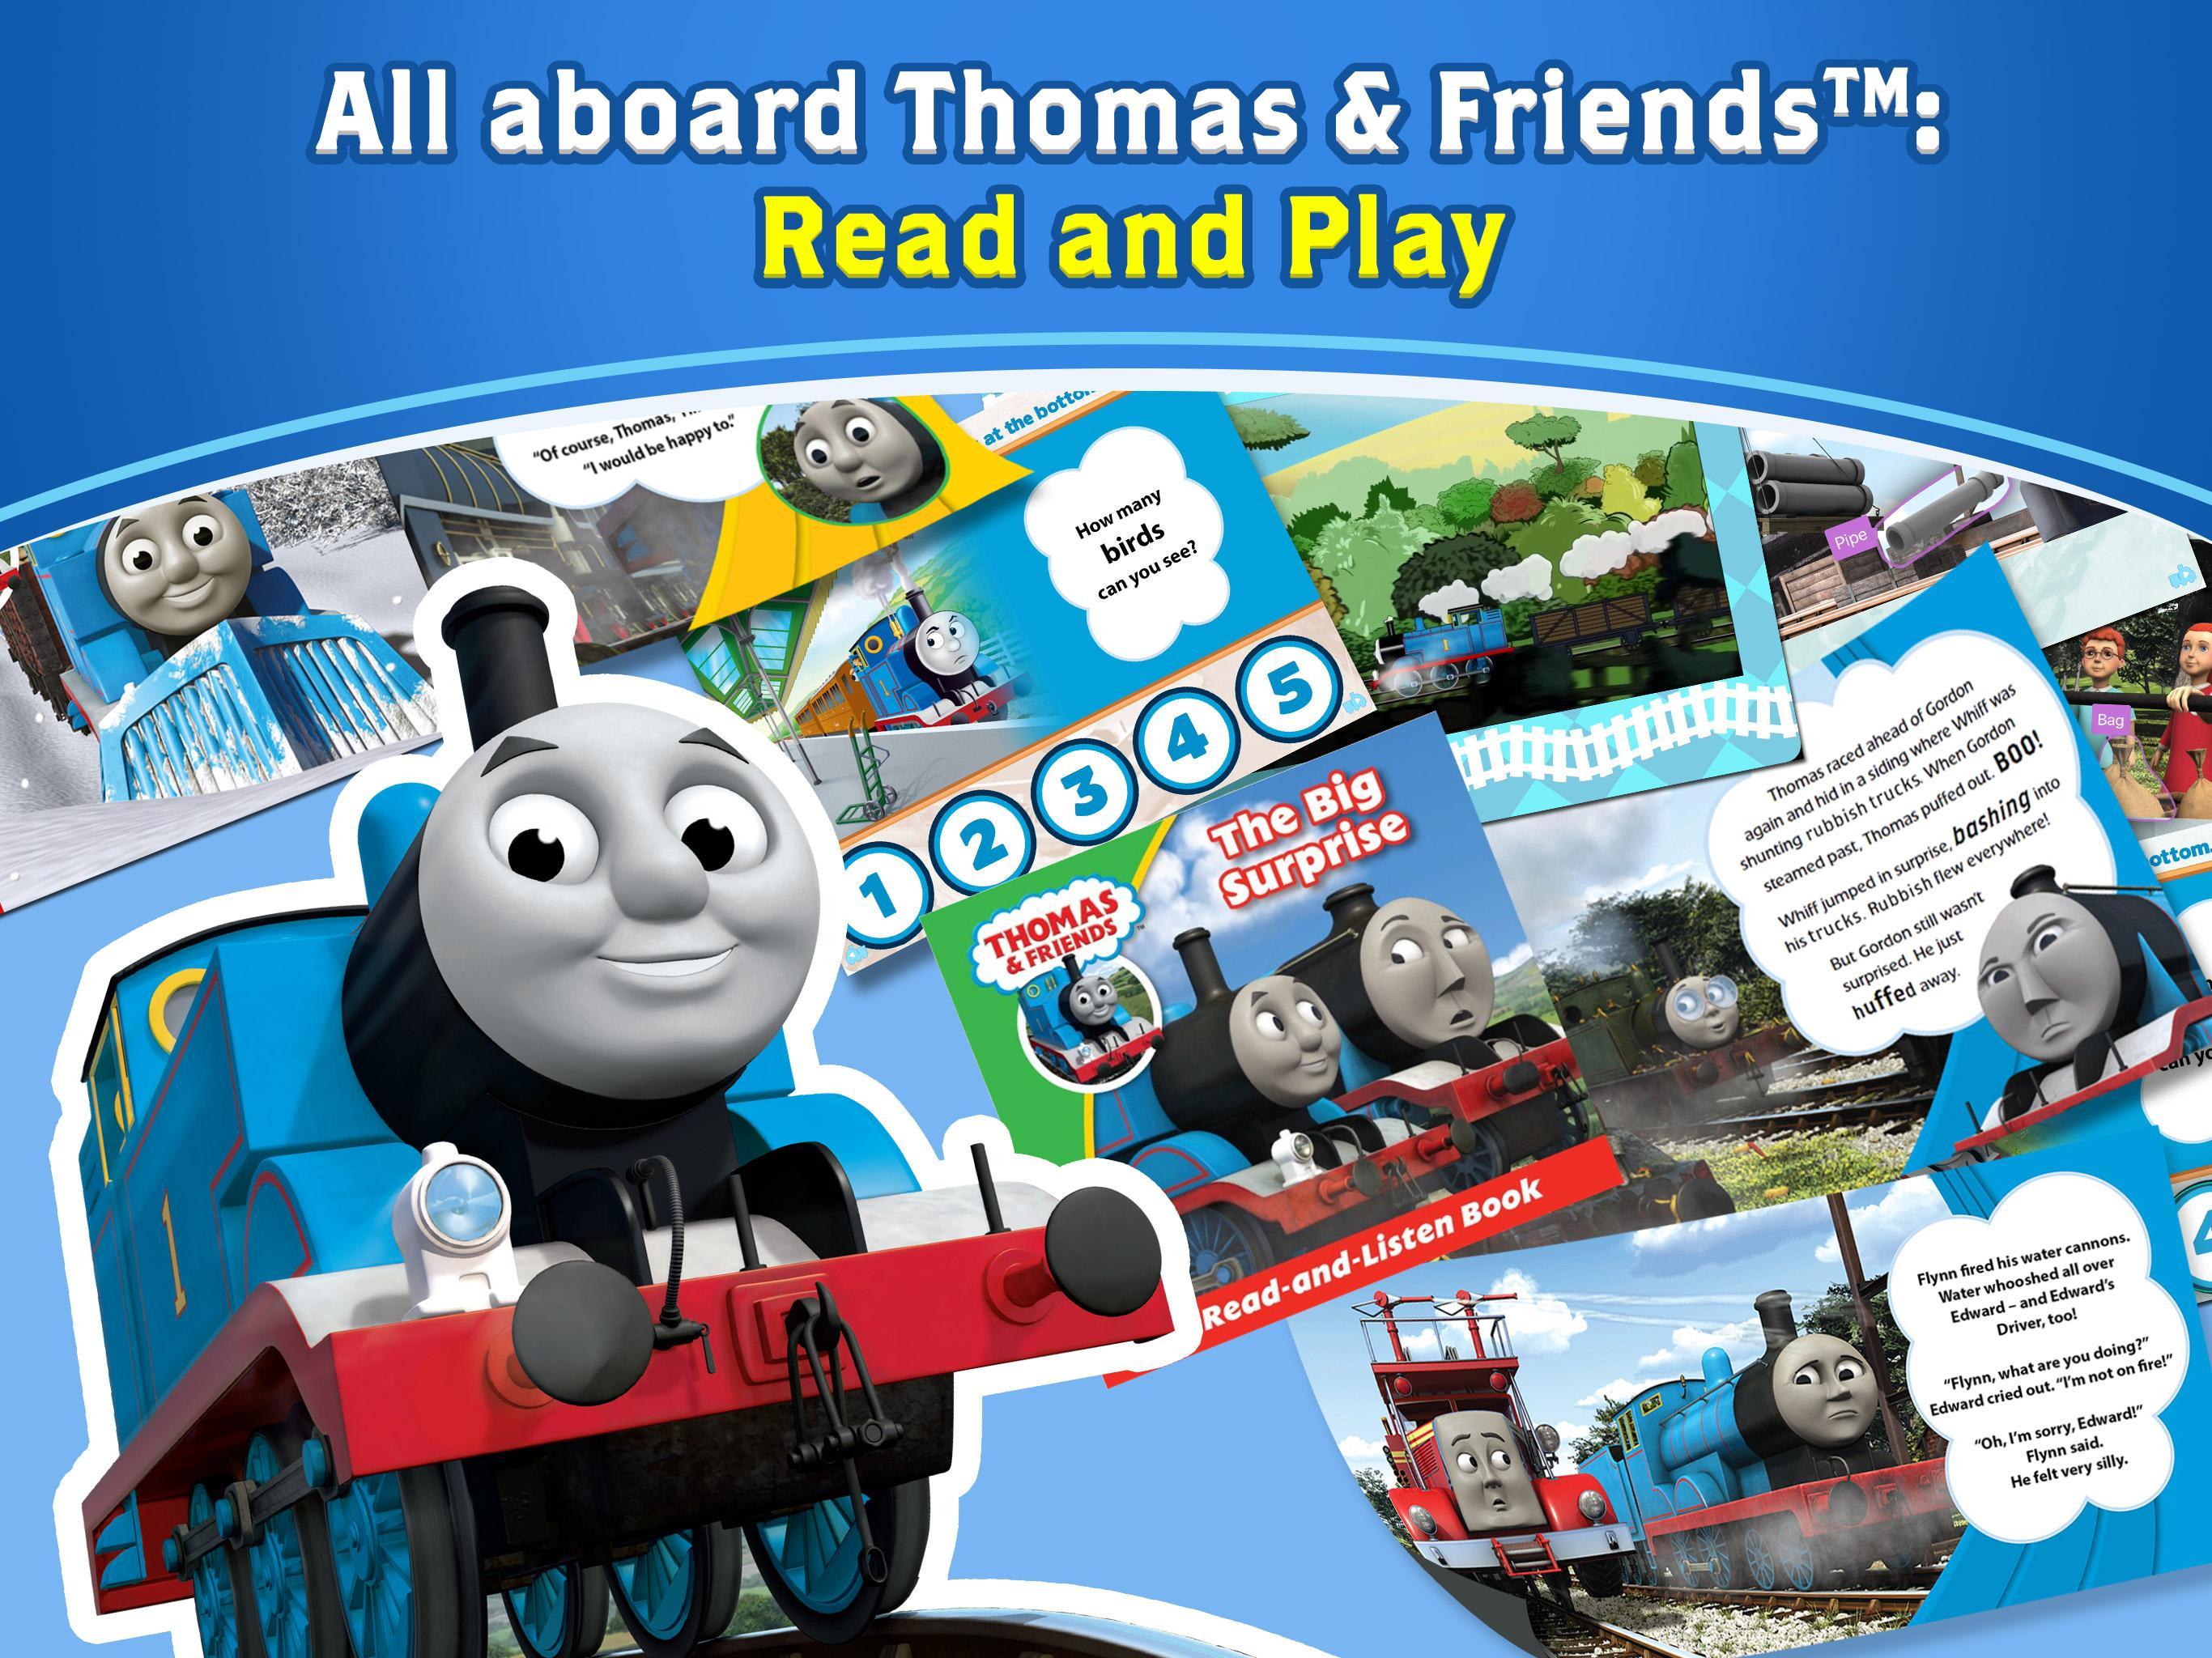 Thomas and friends games. Thomas and friends Play. Thomas and friends app Store.